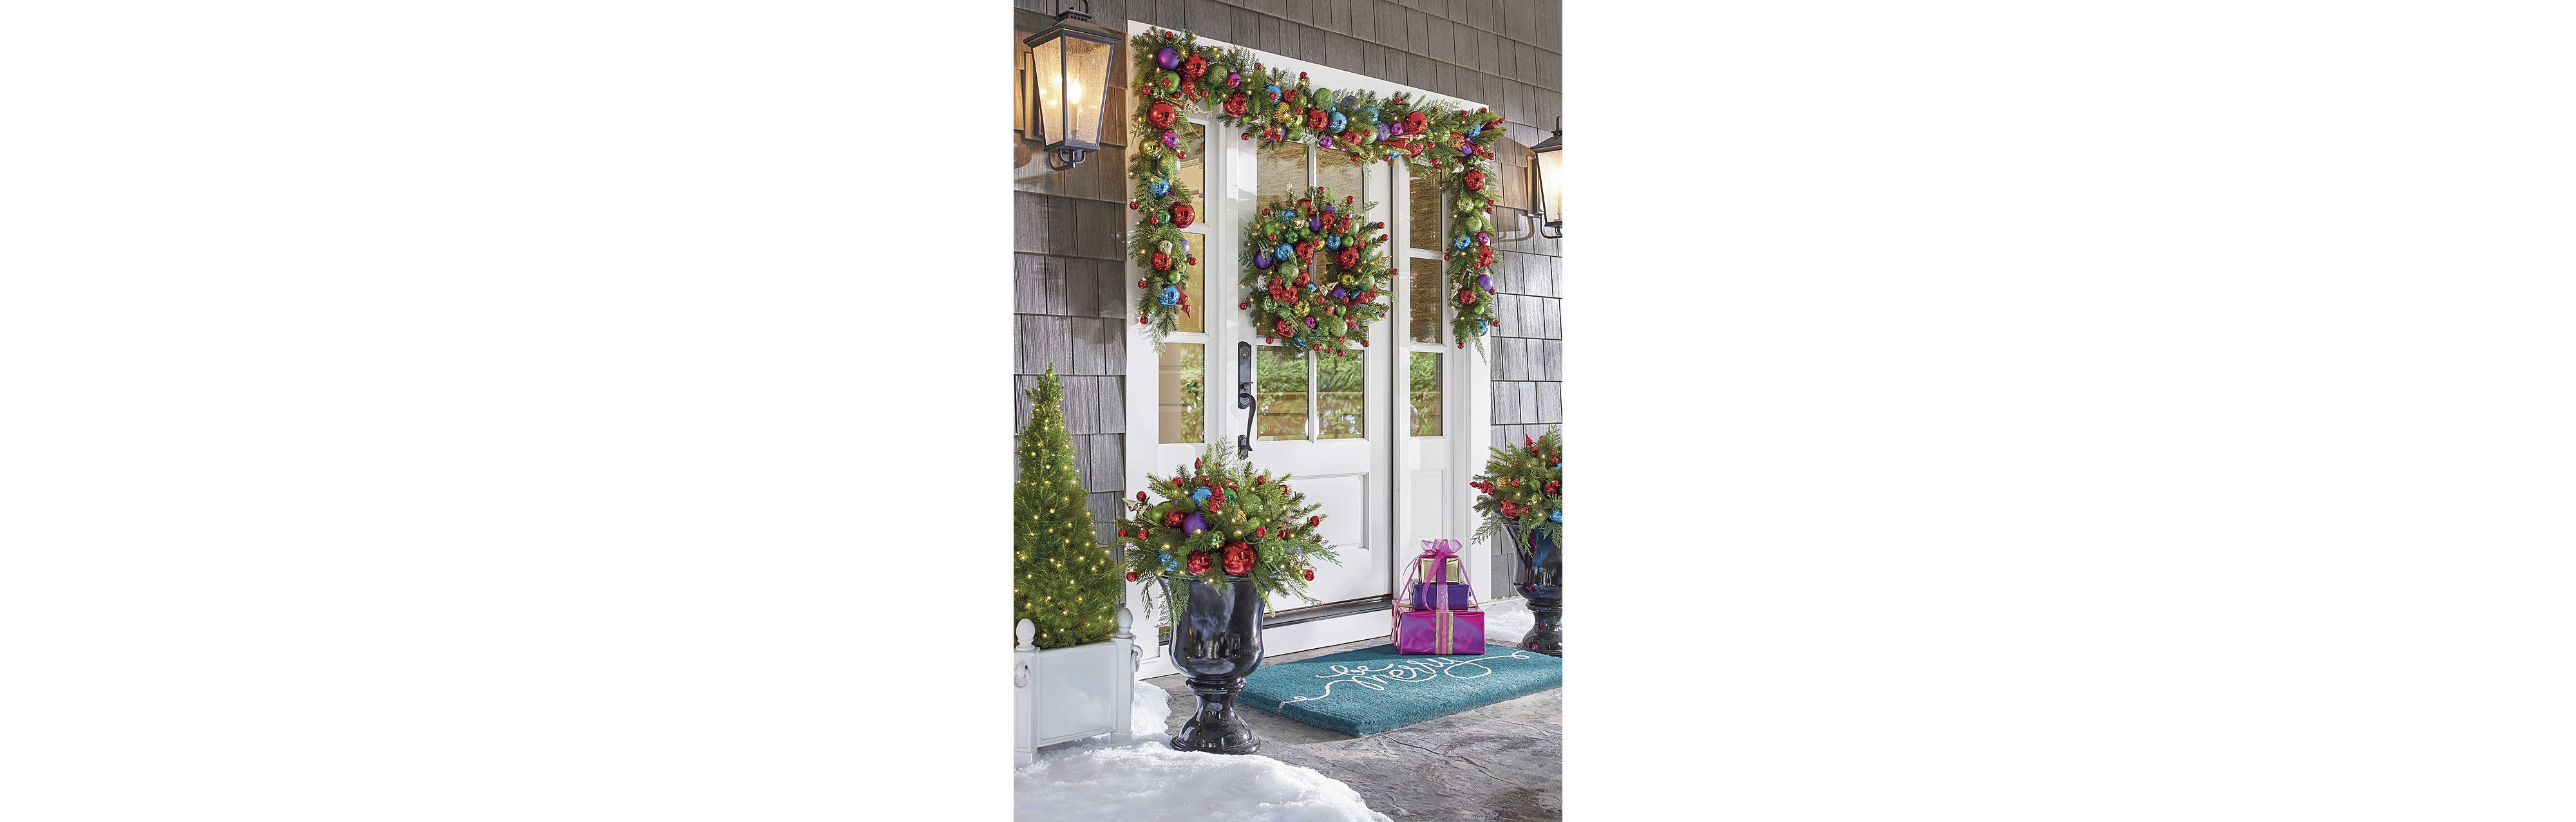 Christmas Porch Decorations: 15 Holly Jolly Looks - Grandin Road Blog